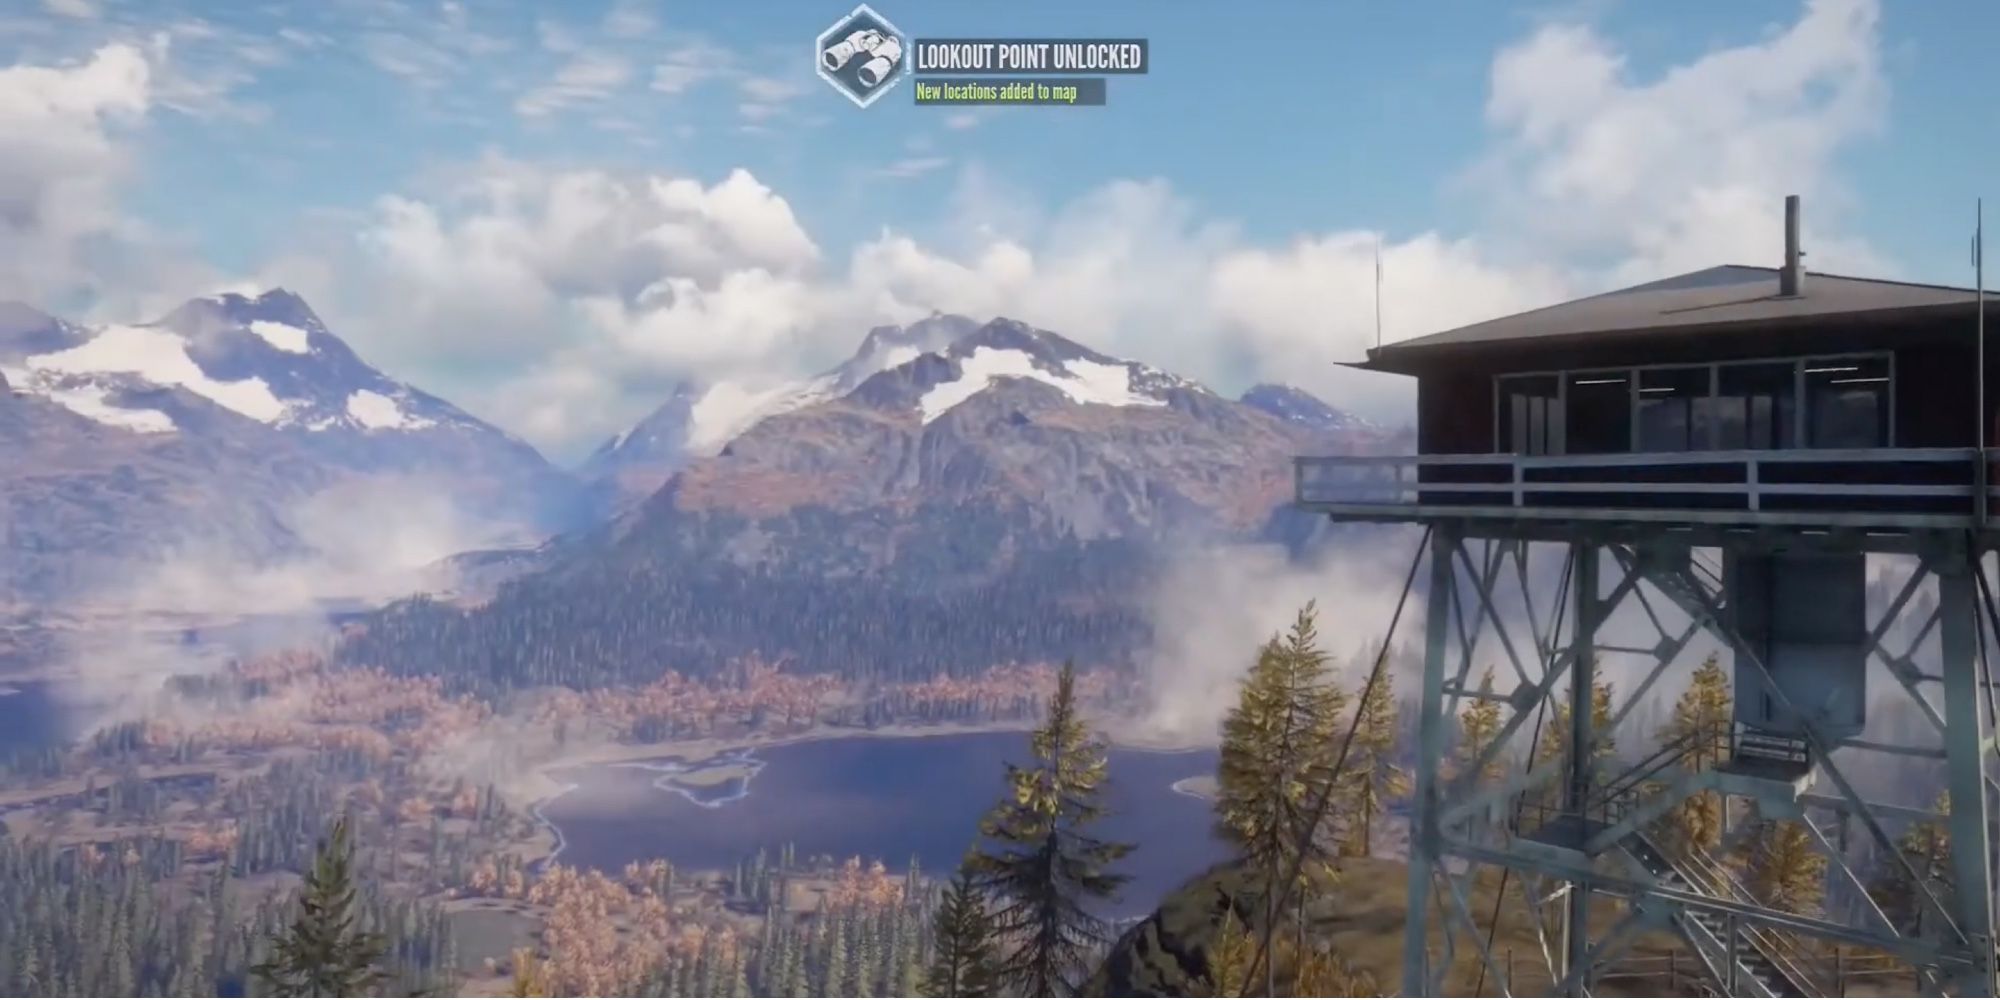 TheHunter - Call of the Wild - Complete Missions On Each Reserve - Player unlocks new Lookout Point